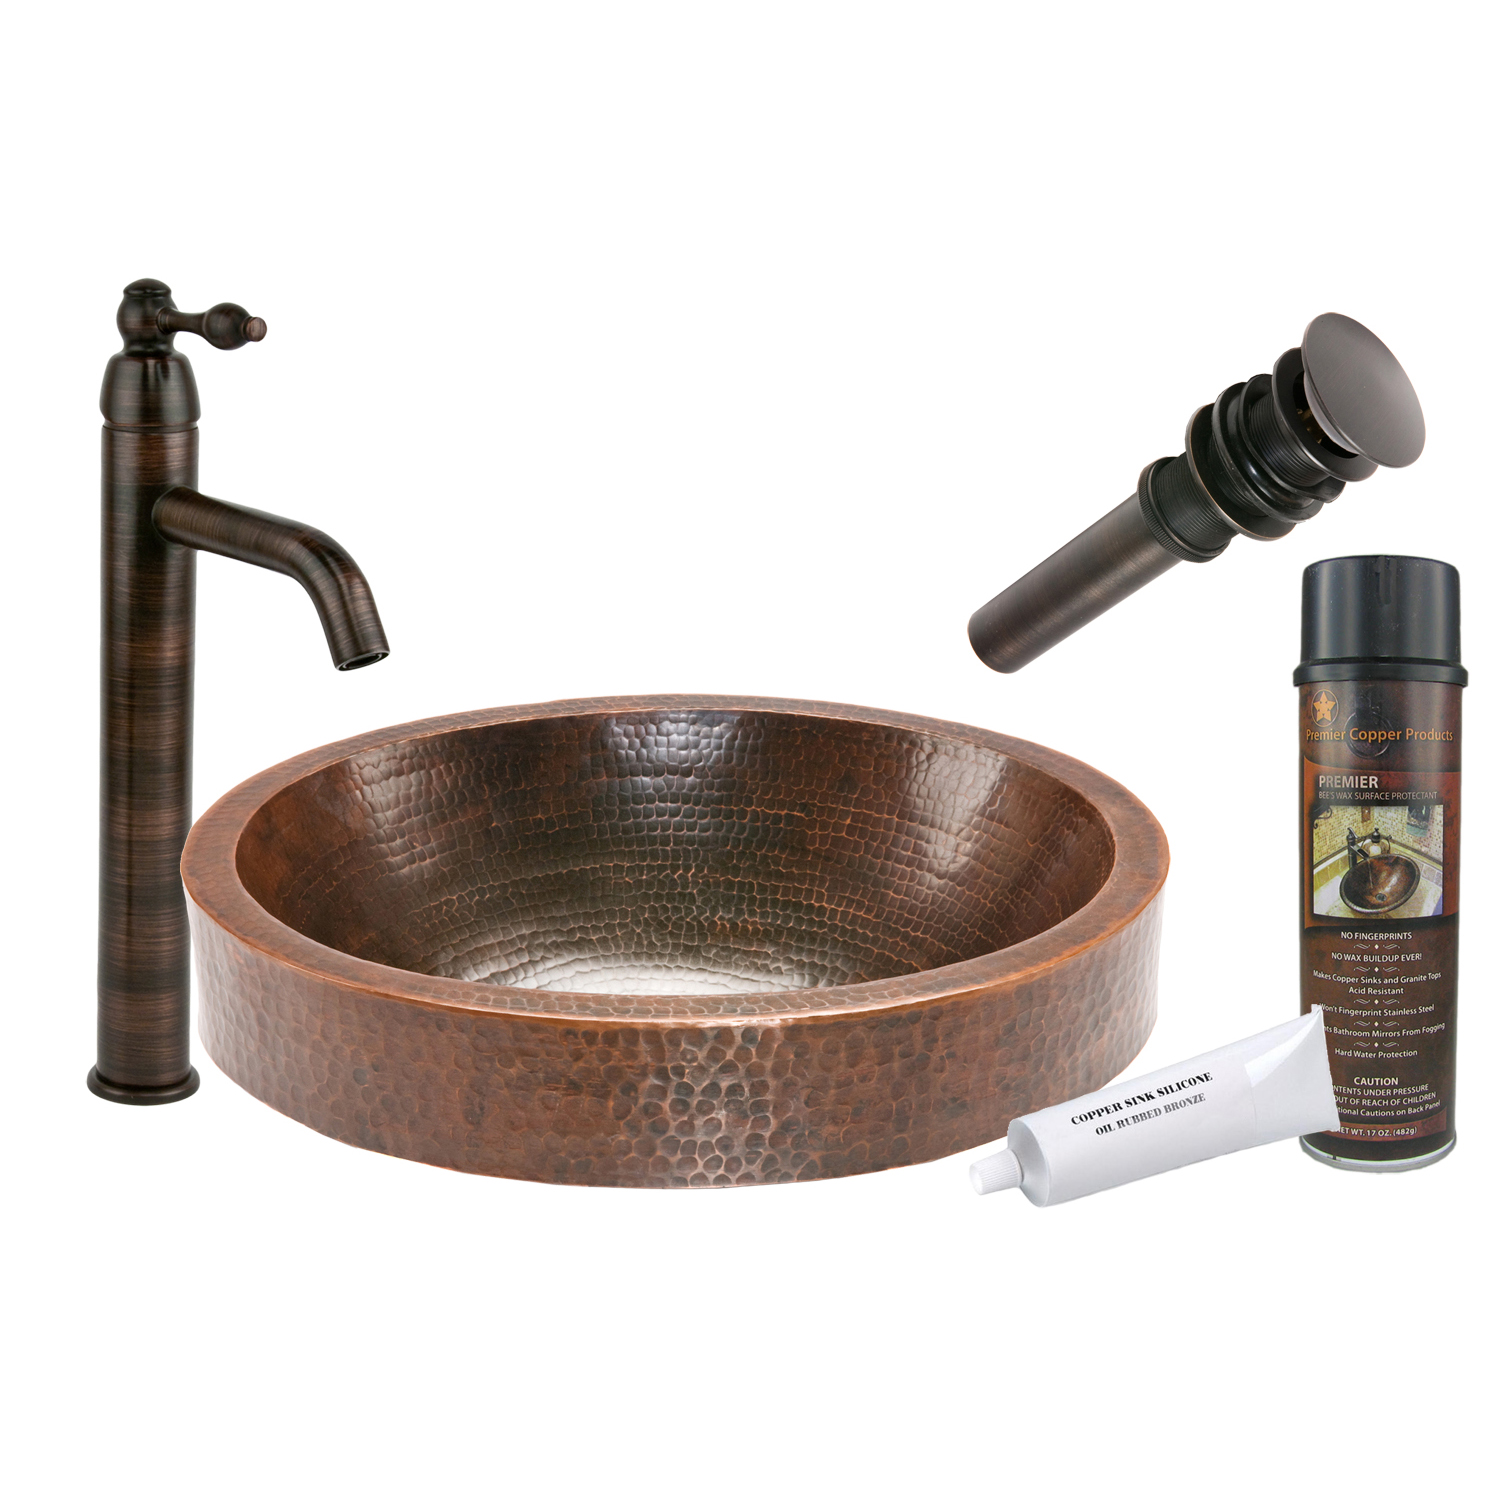 Oval Skirted Vessel Hammered Copper Sink, Faucet And Accessories Package, Oil Rubbed Bronze